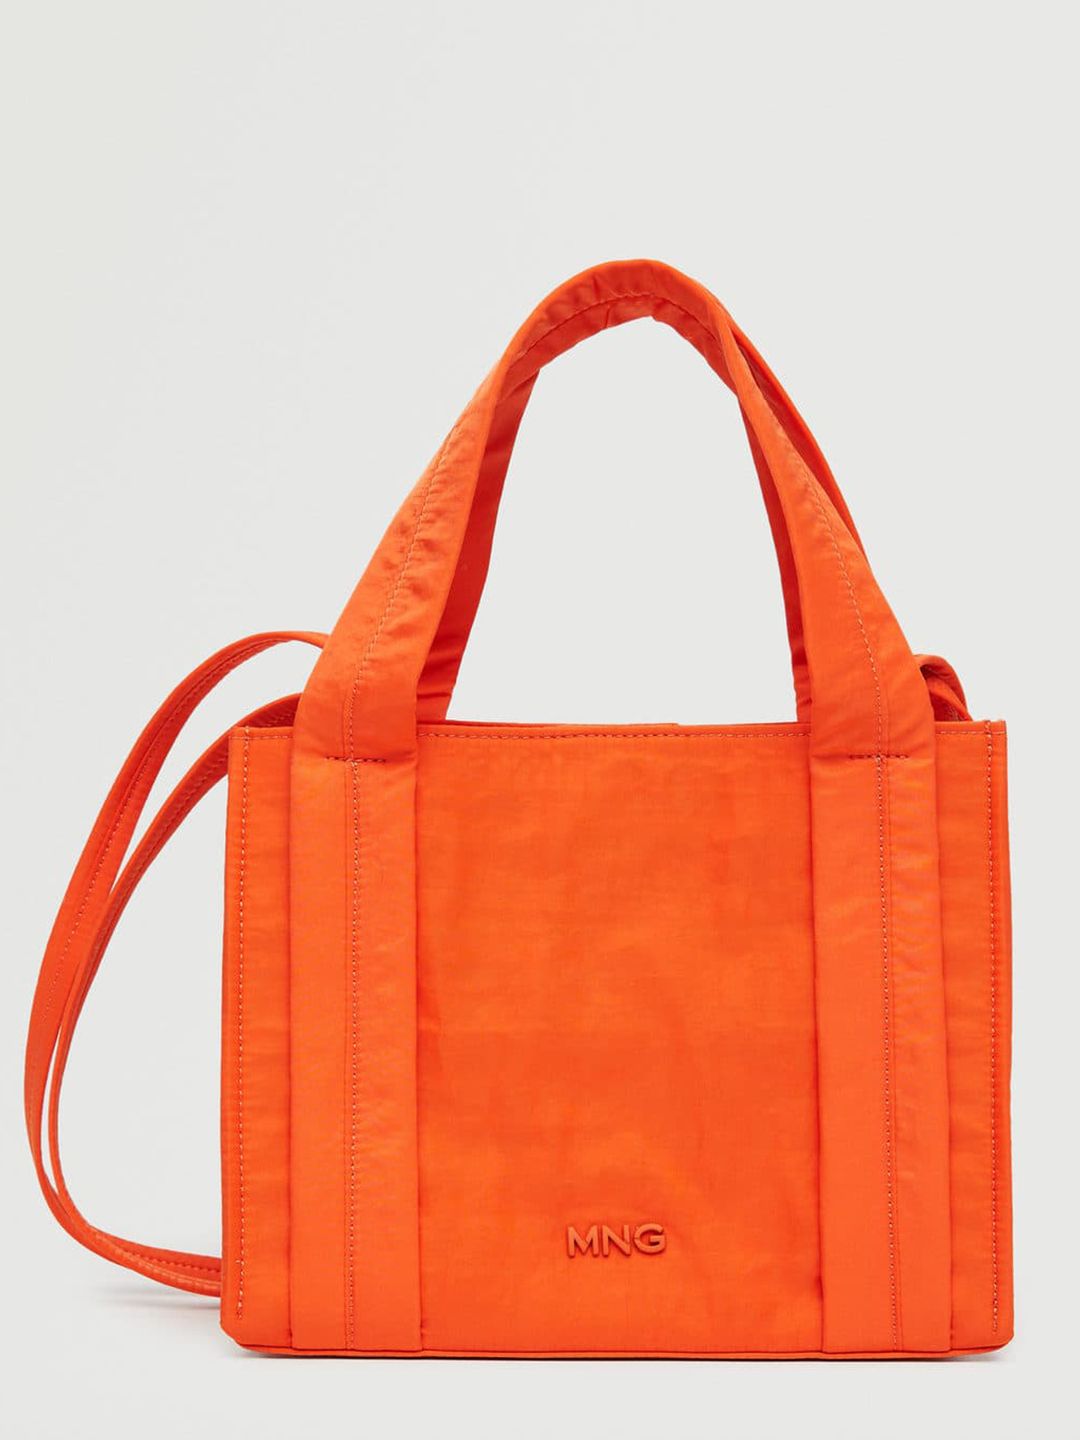 MANGO Orange Solid Structured Handheld Bag with Non-Detachable Shoulder Strap Price in India